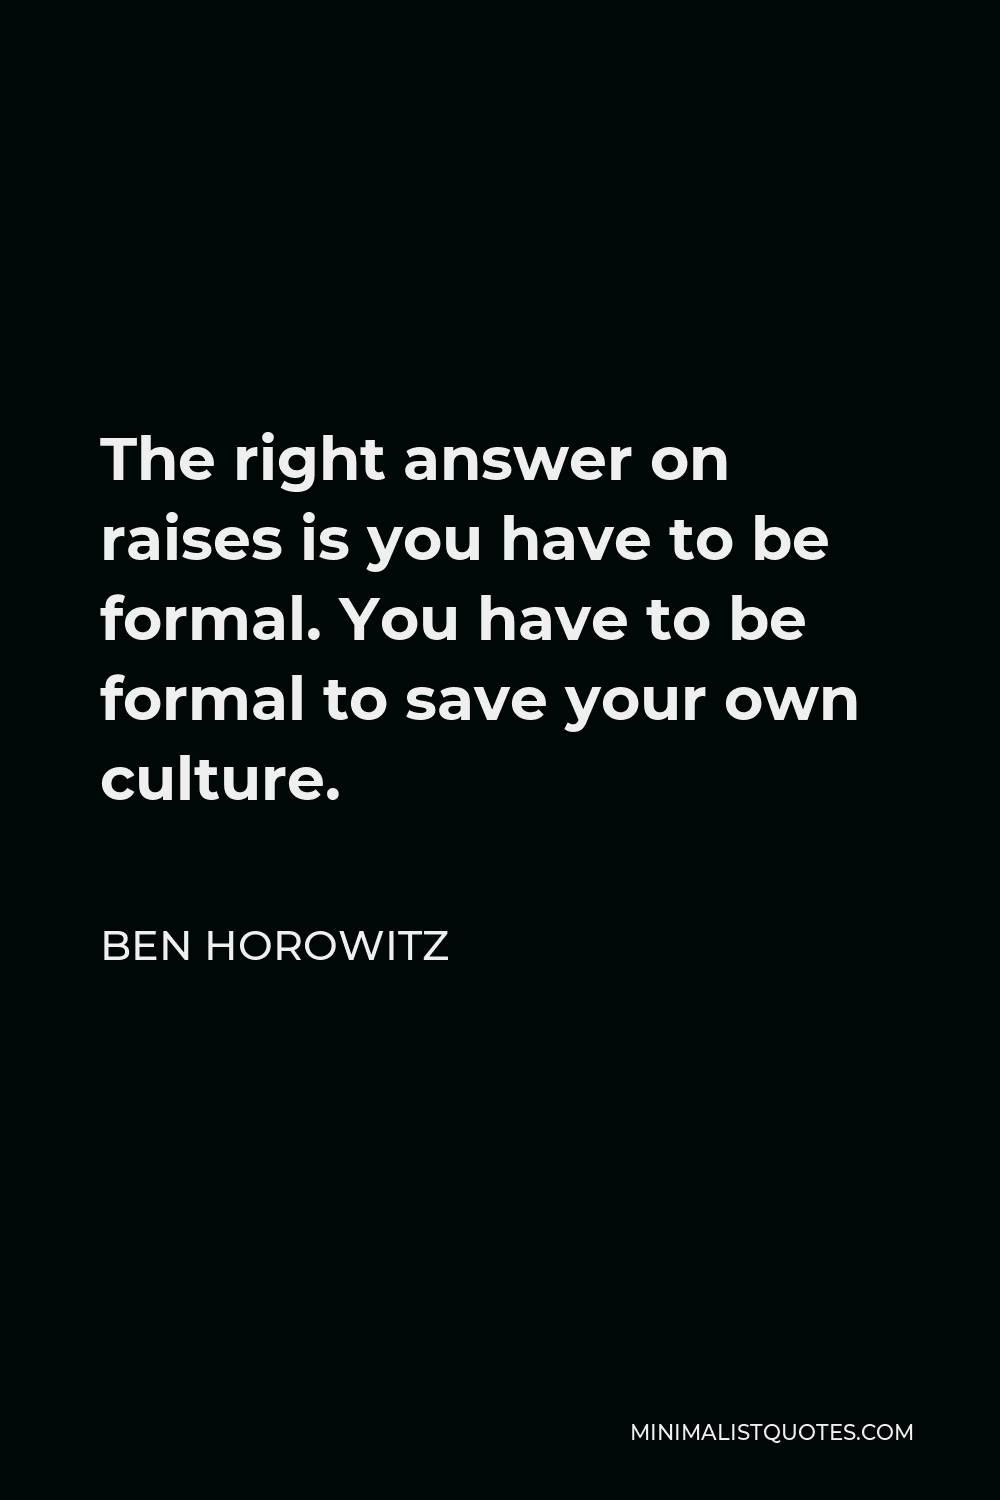 Ben Horowitz Quote - The right answer on raises is you have to be formal. You have to be formal to save your own culture.